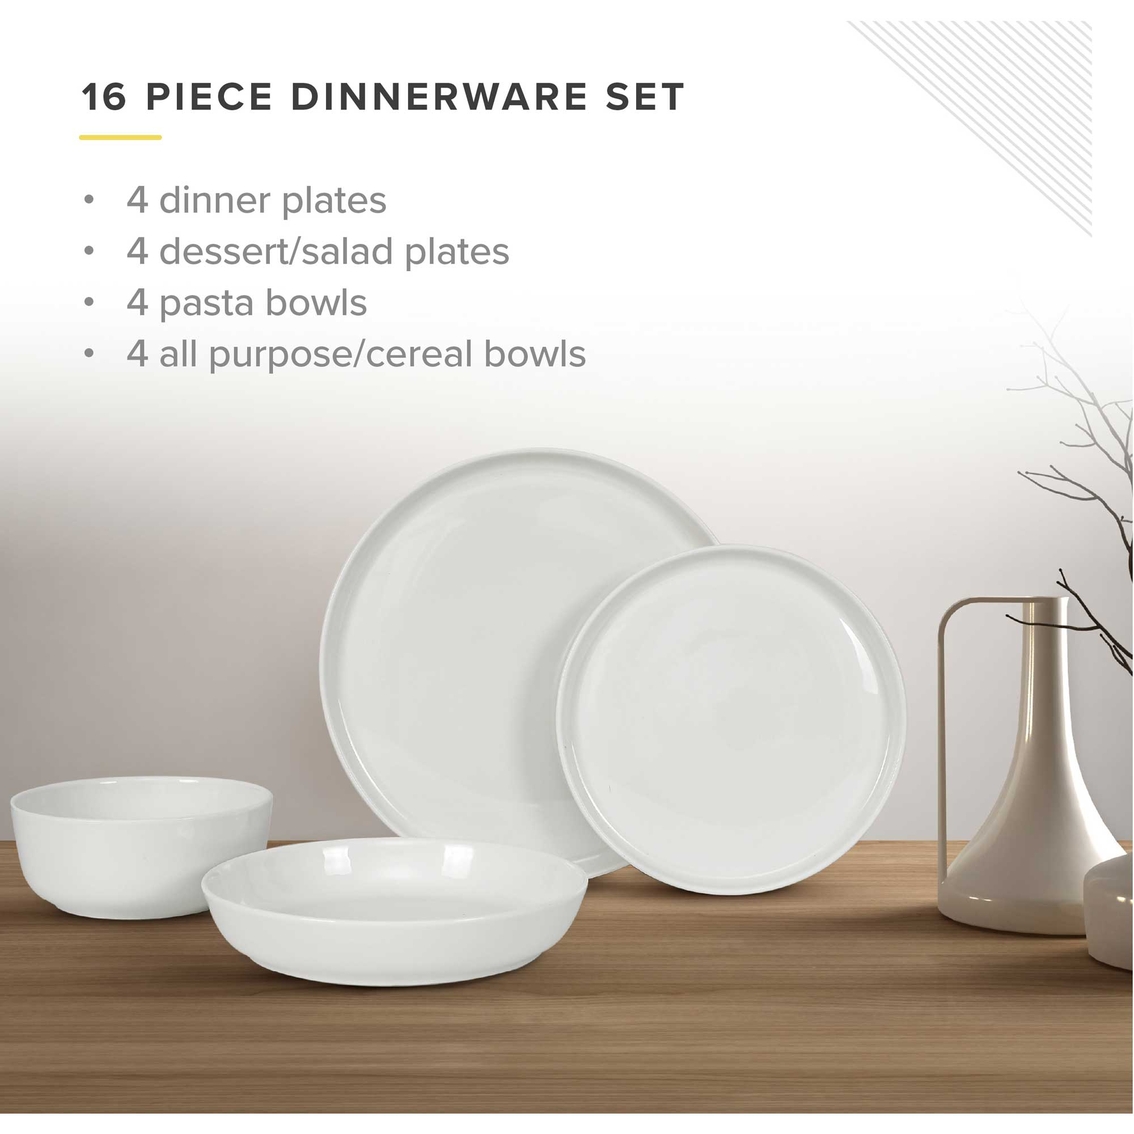 Table 12 Natural White Dinnerware Set 16 pc. - Image 2 of 7